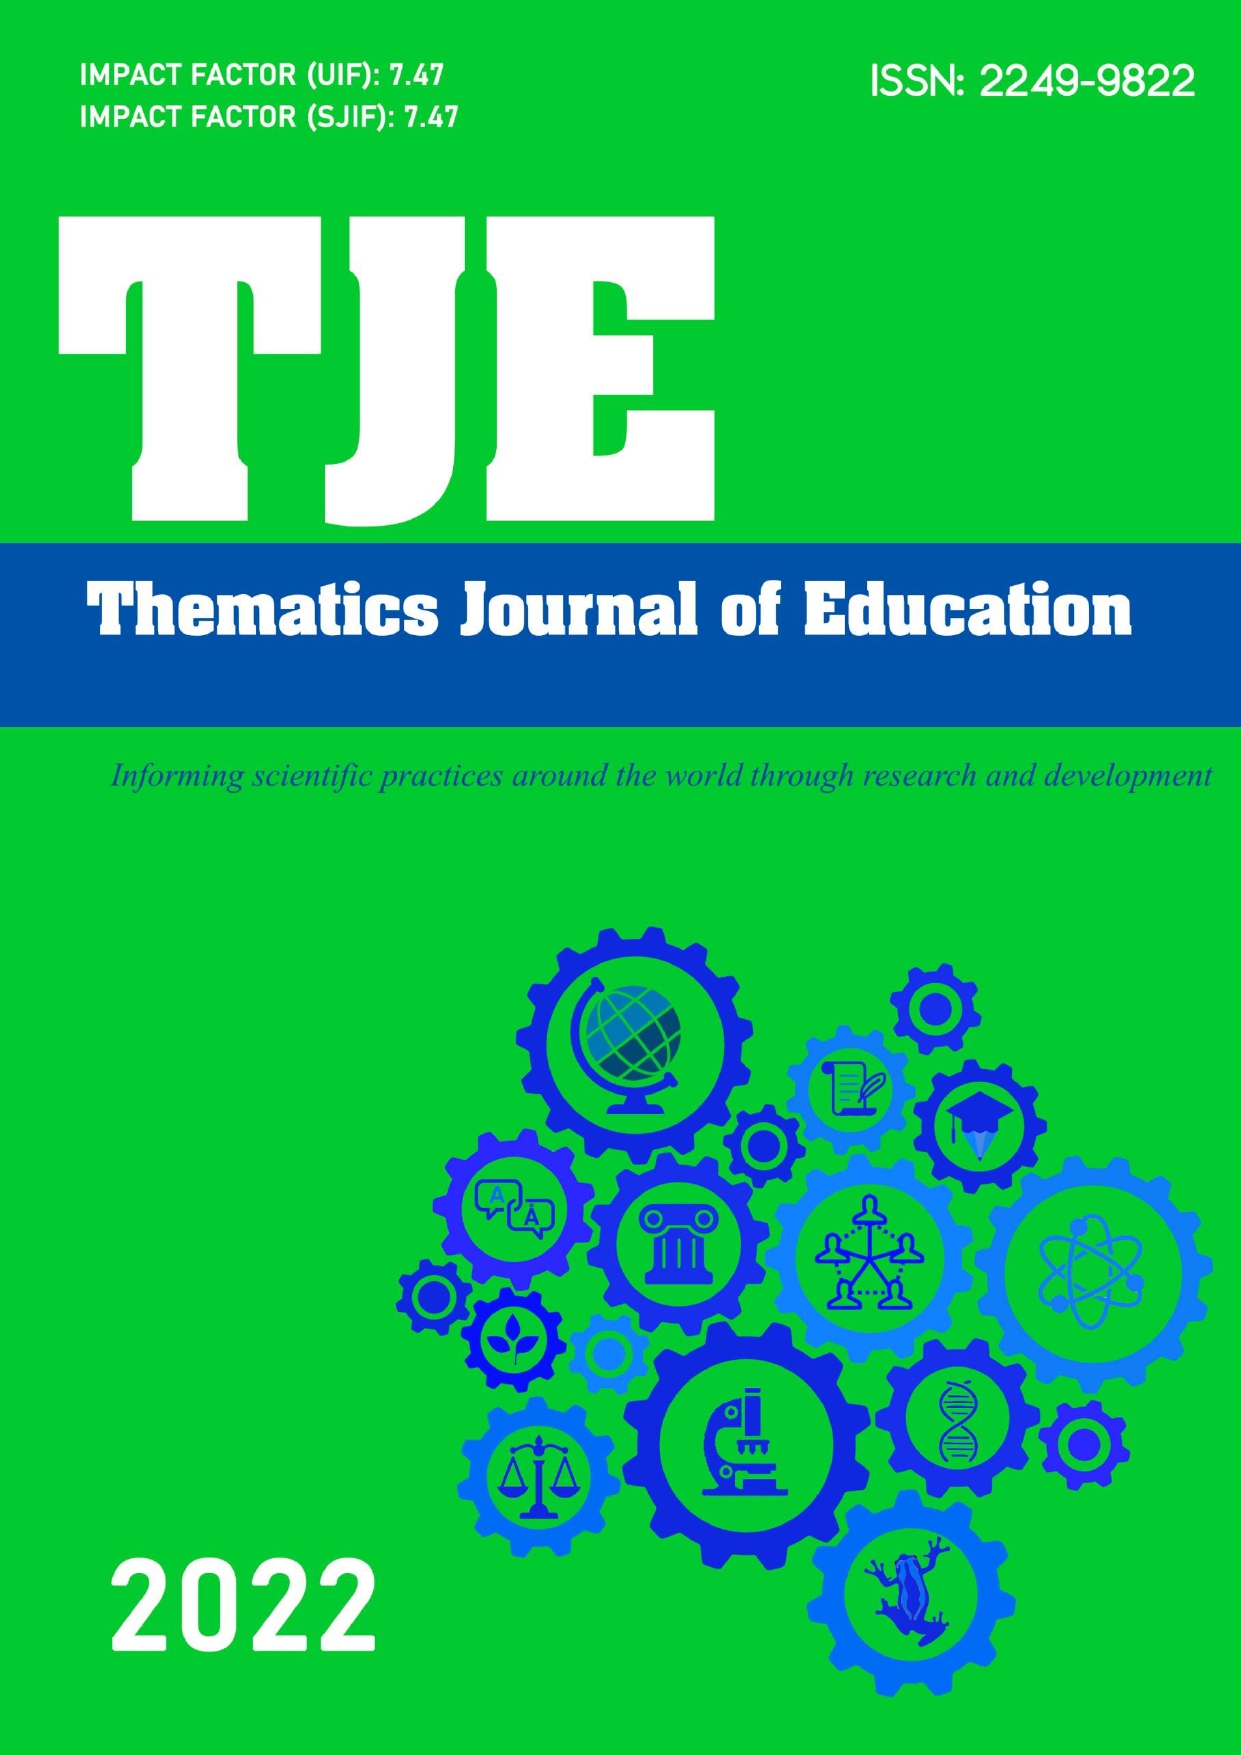 					View Vol. 7 No. 4 (2022): Thematics Journal of Education
				